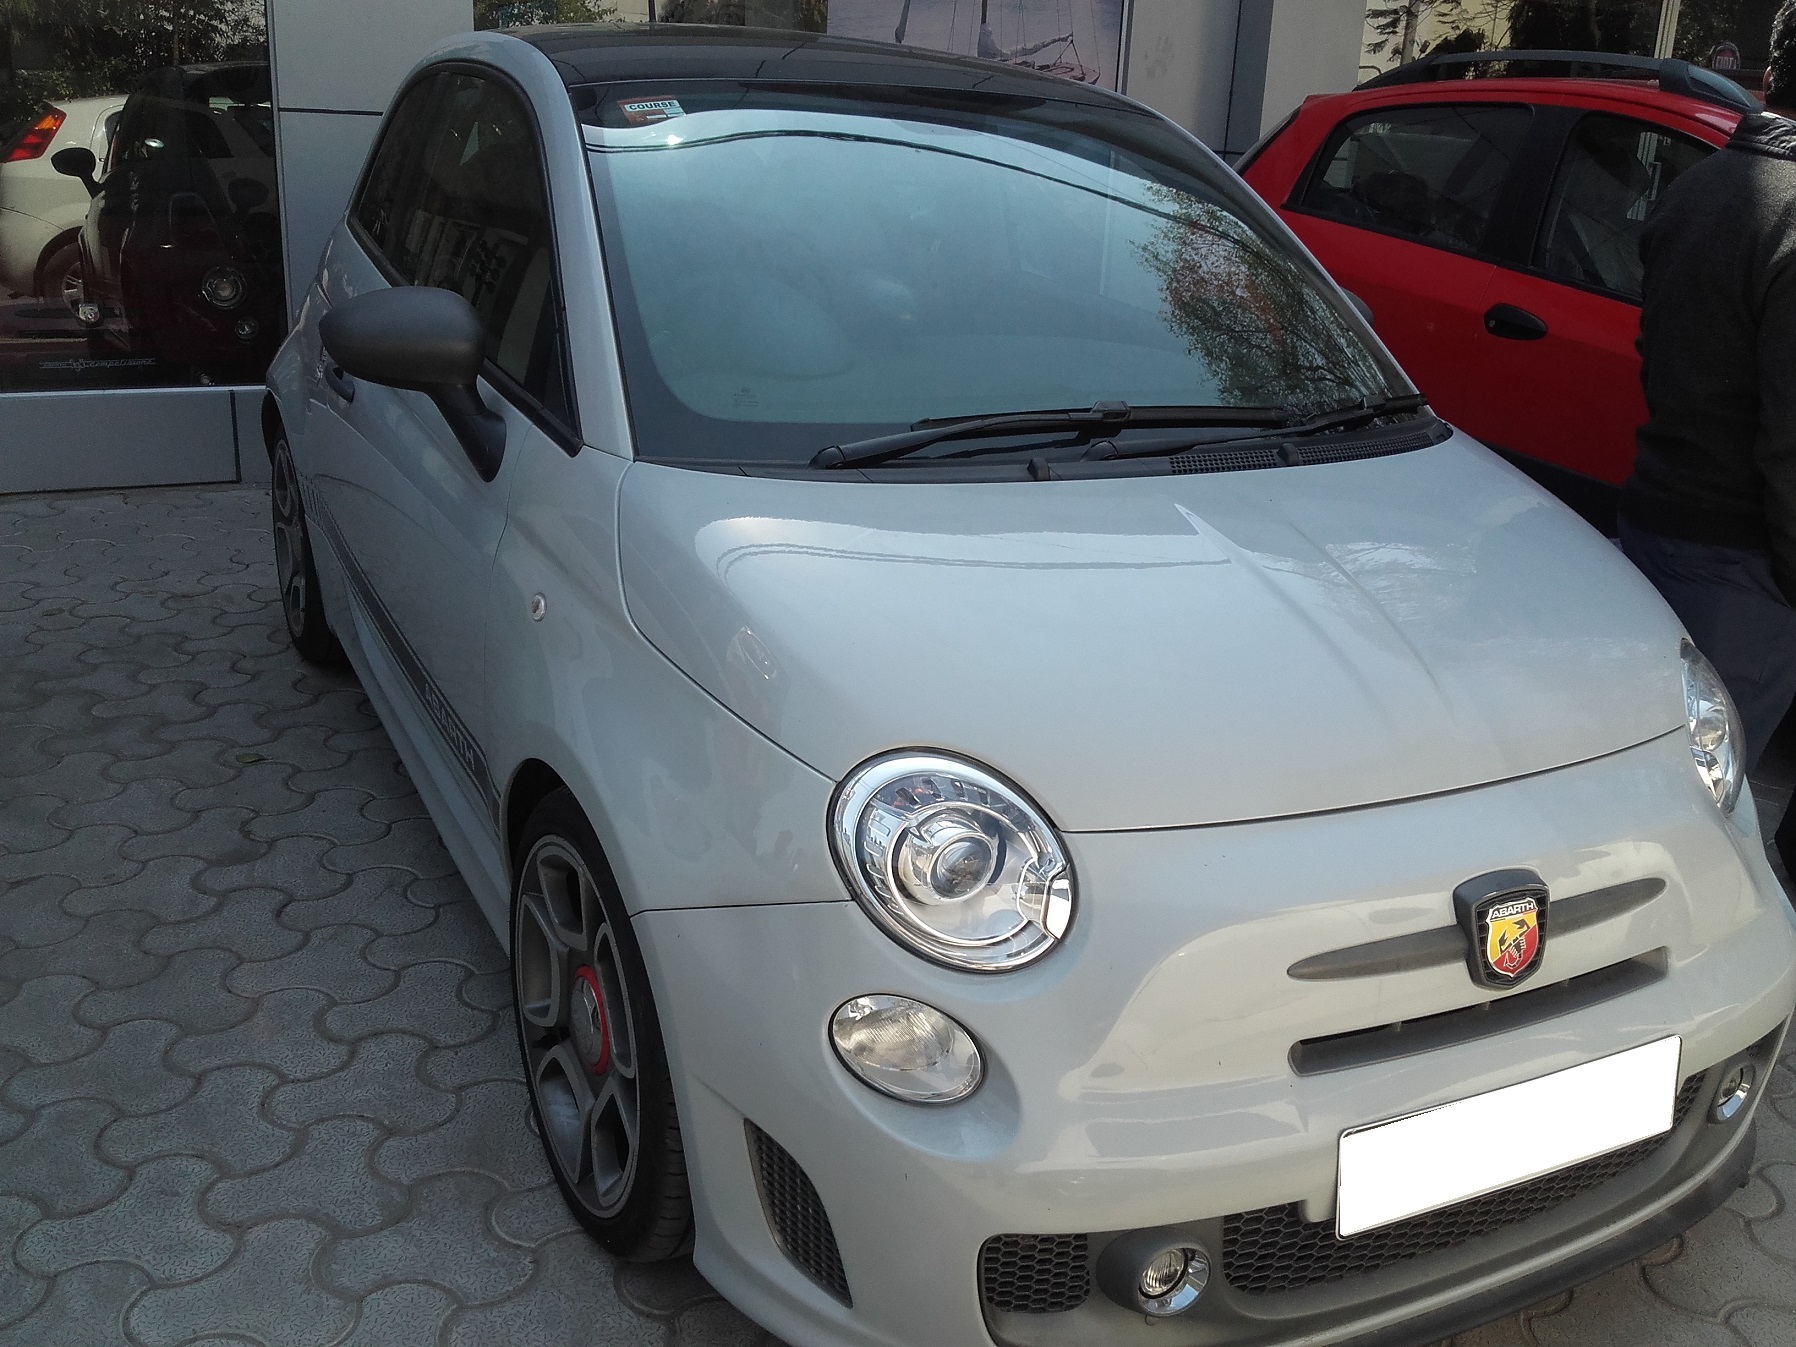 Fiat Abarth 595 launched at Rs 29.85 lakh